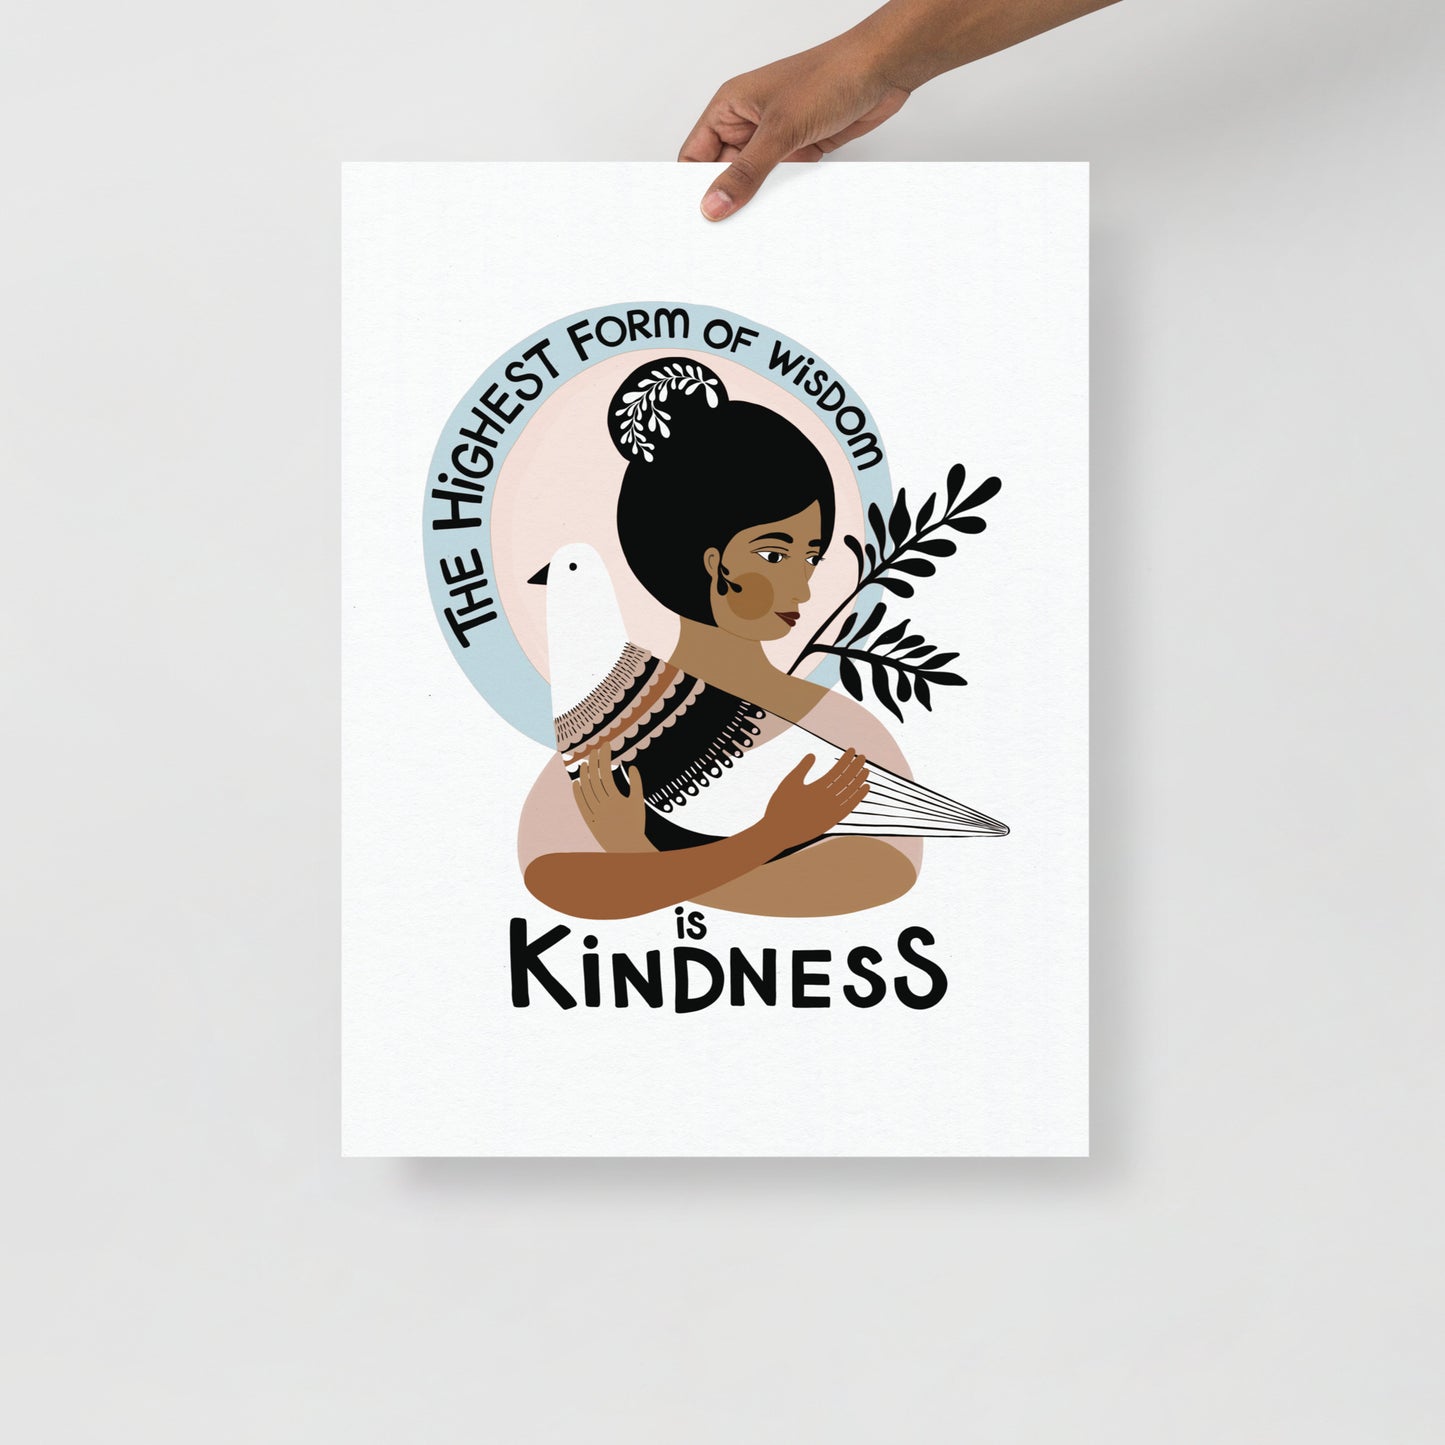 "The highest Form of Wisdom is Kindness" Art Print